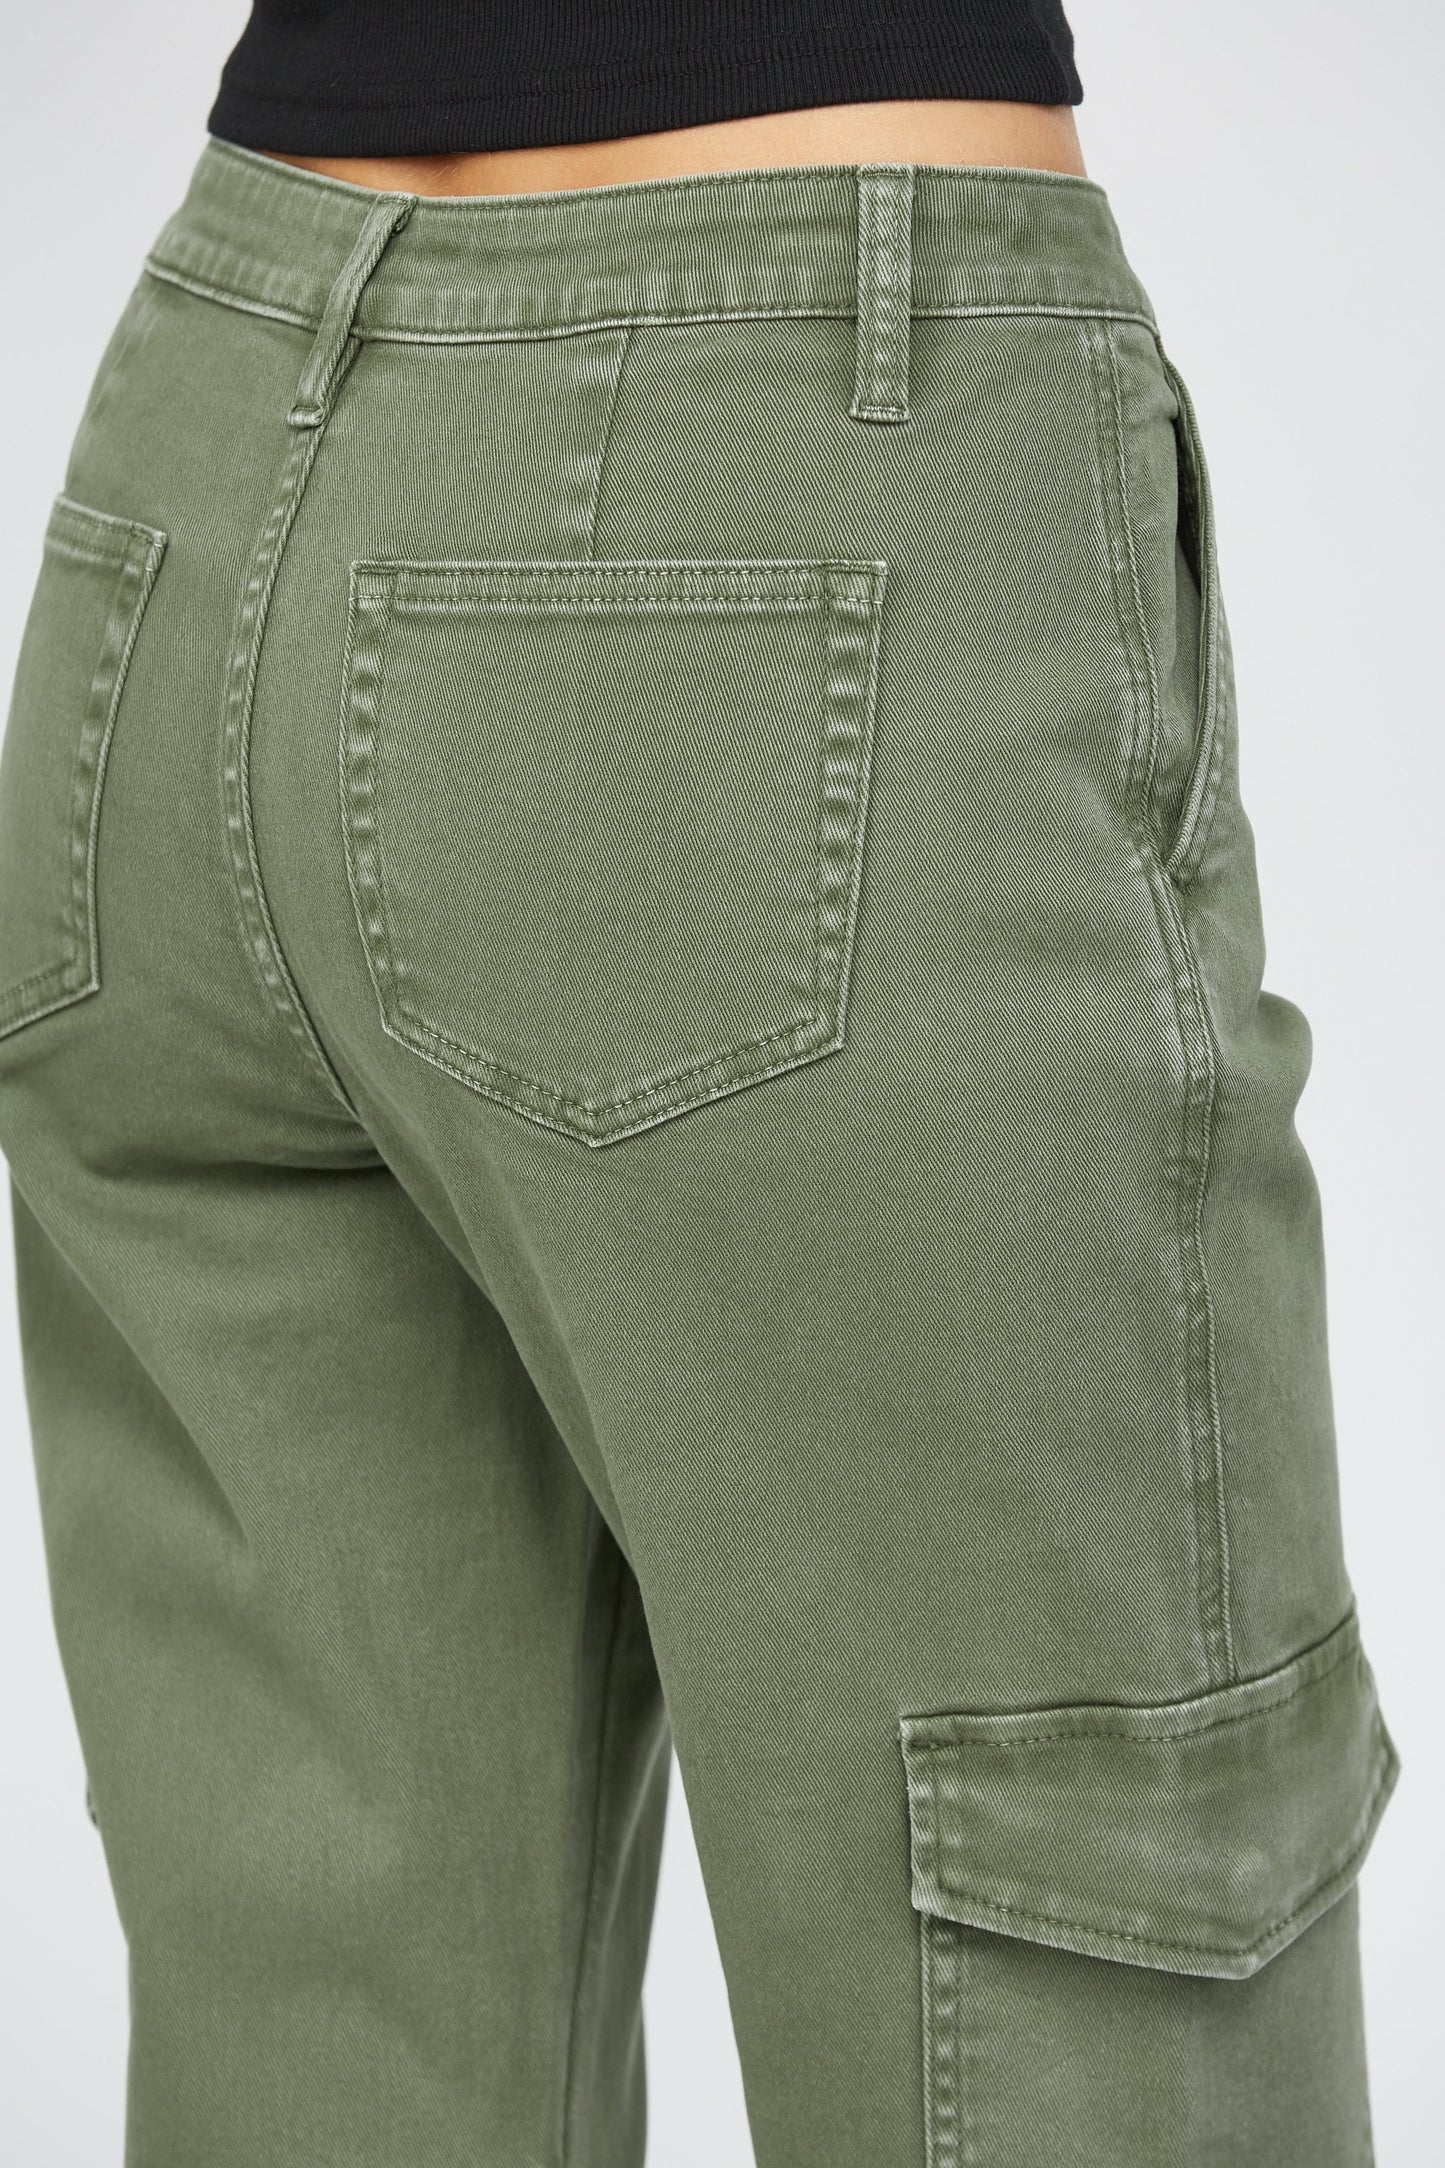 HIGH RISE TAPERED CROP OLIVE PANT